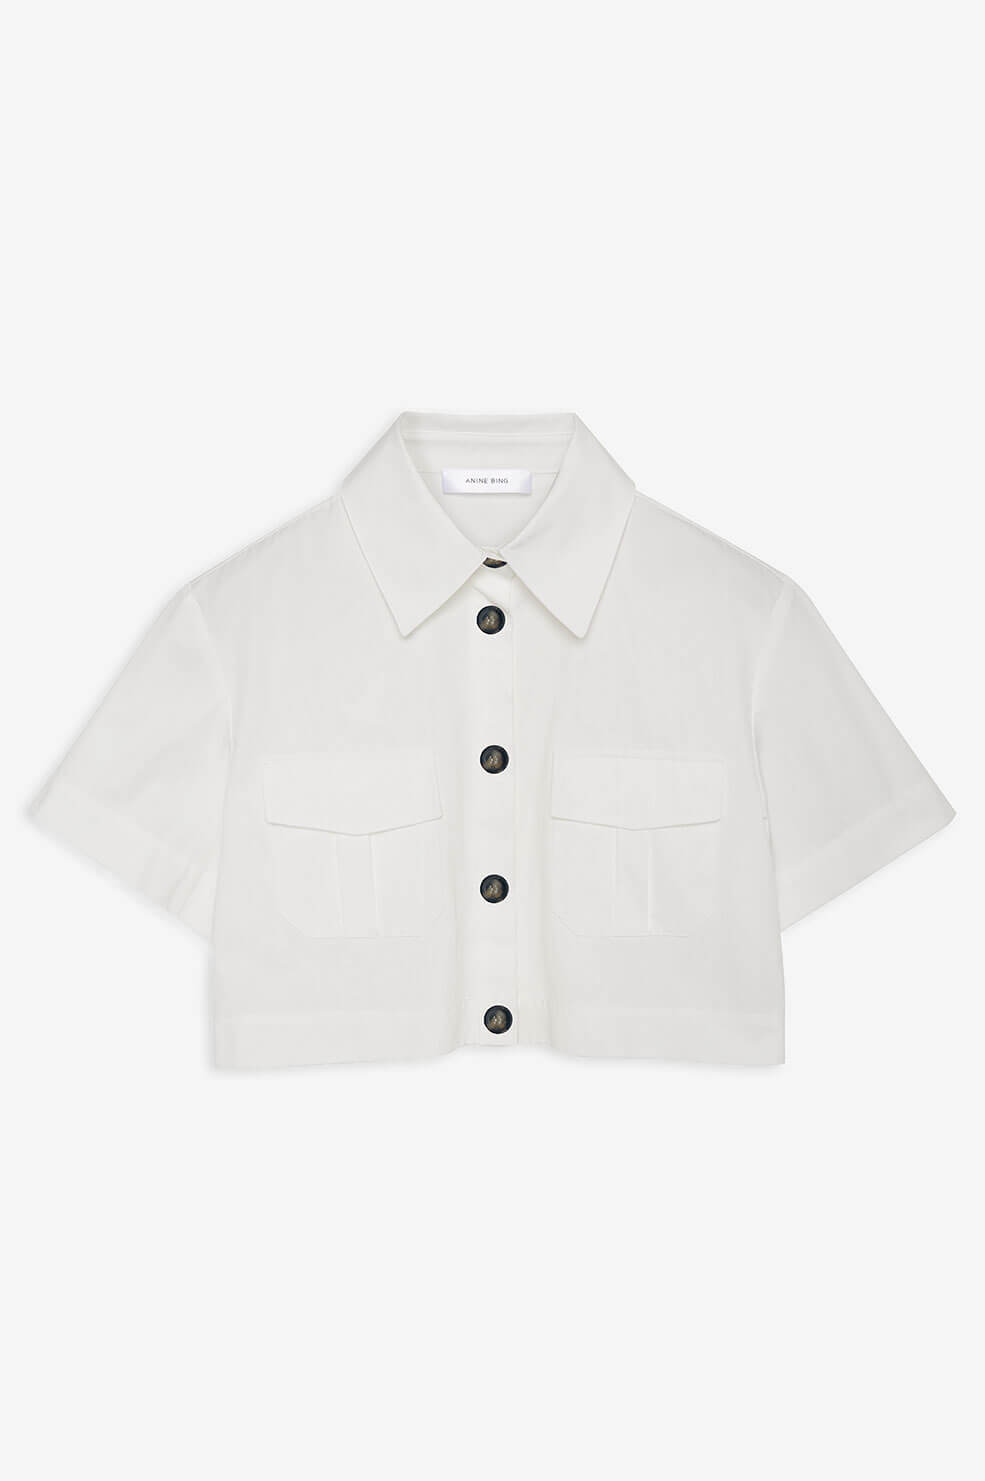 Anine Bing - Scout Shirt in White